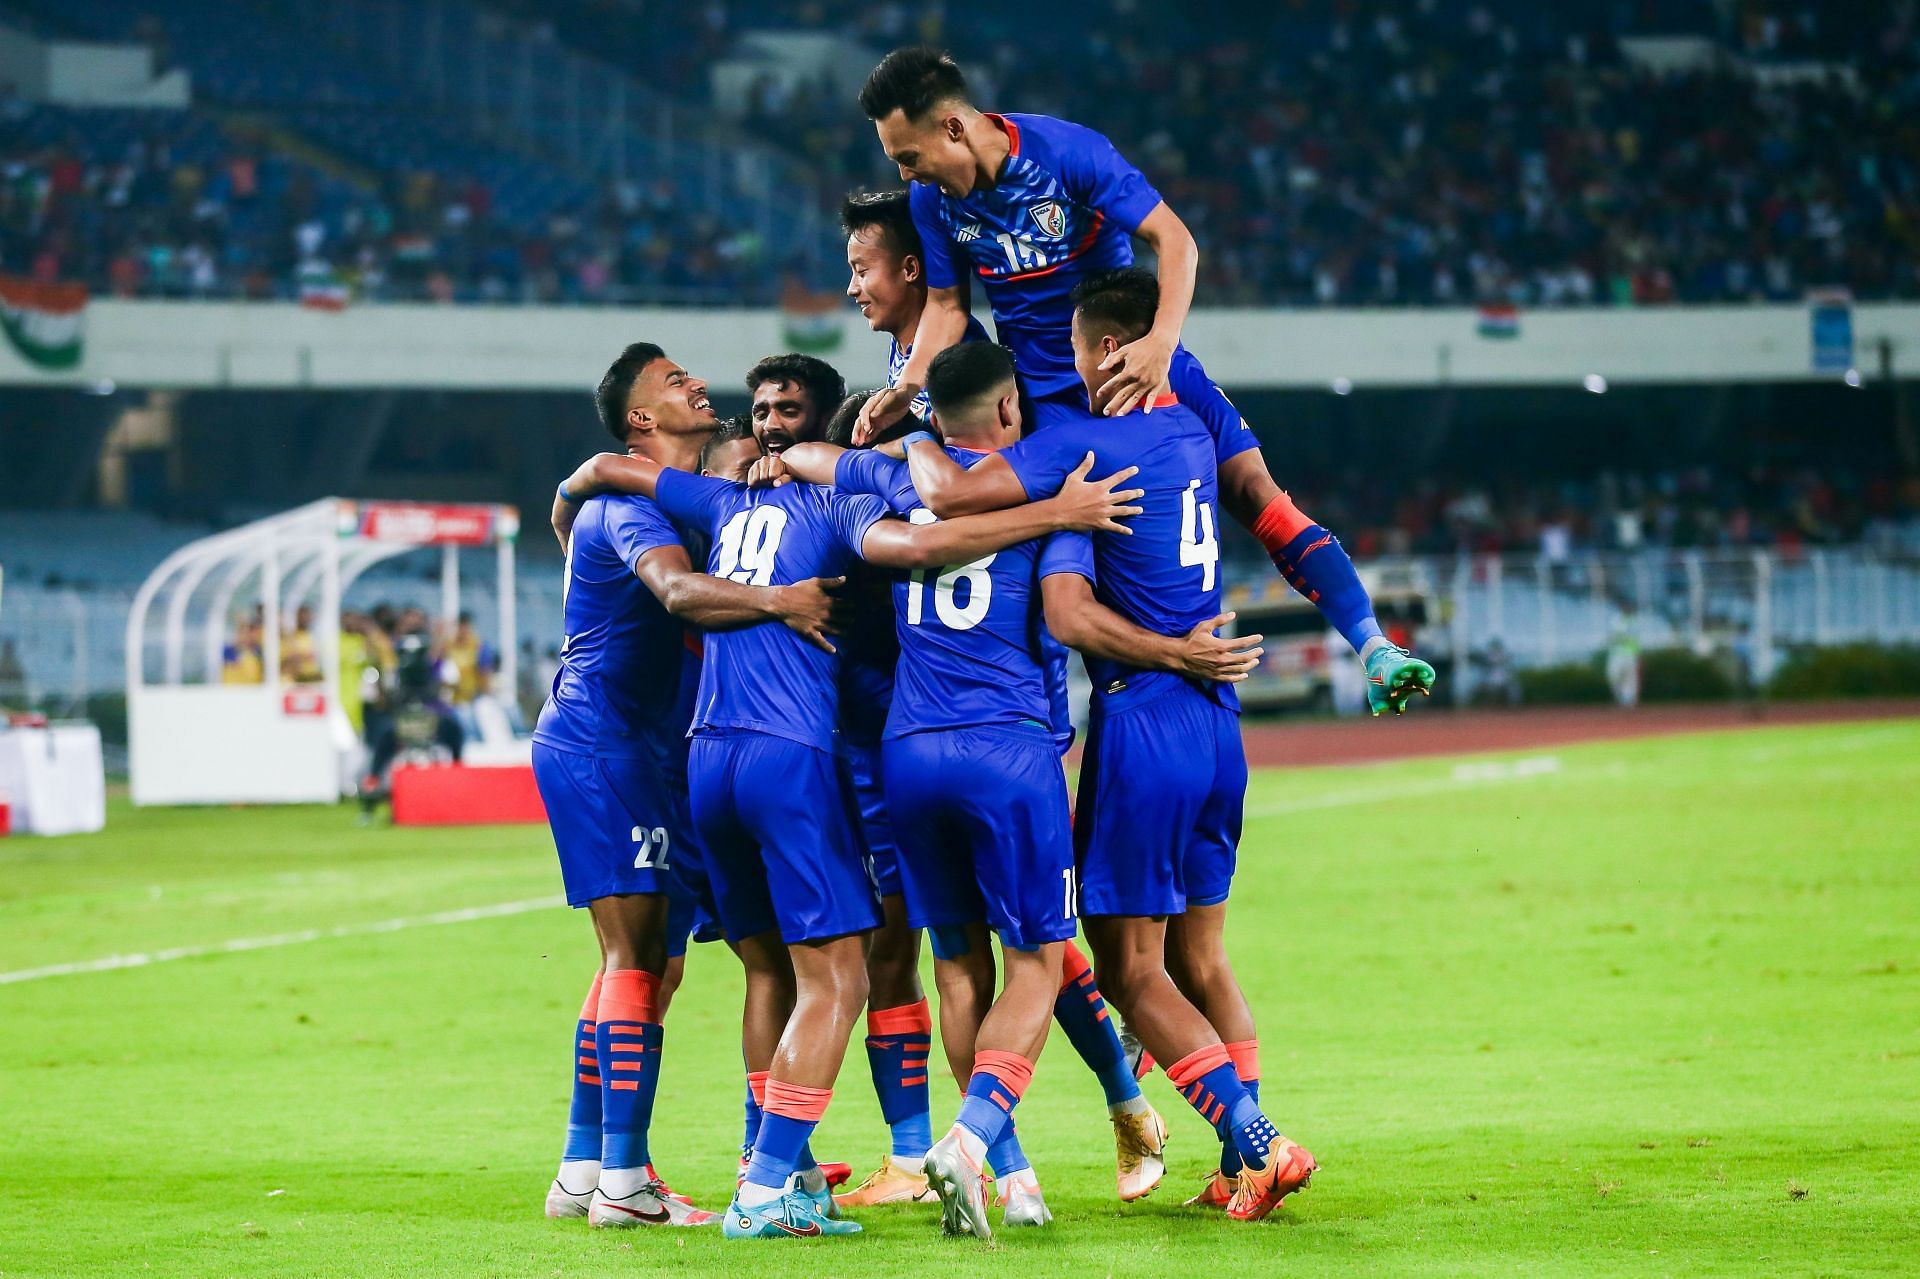 Indian national team players celebrating a goal against Hong Kong in their final group game in the AFC Asian Cup Qualifiers 2023 (Image Courtesy: AIFF Media)